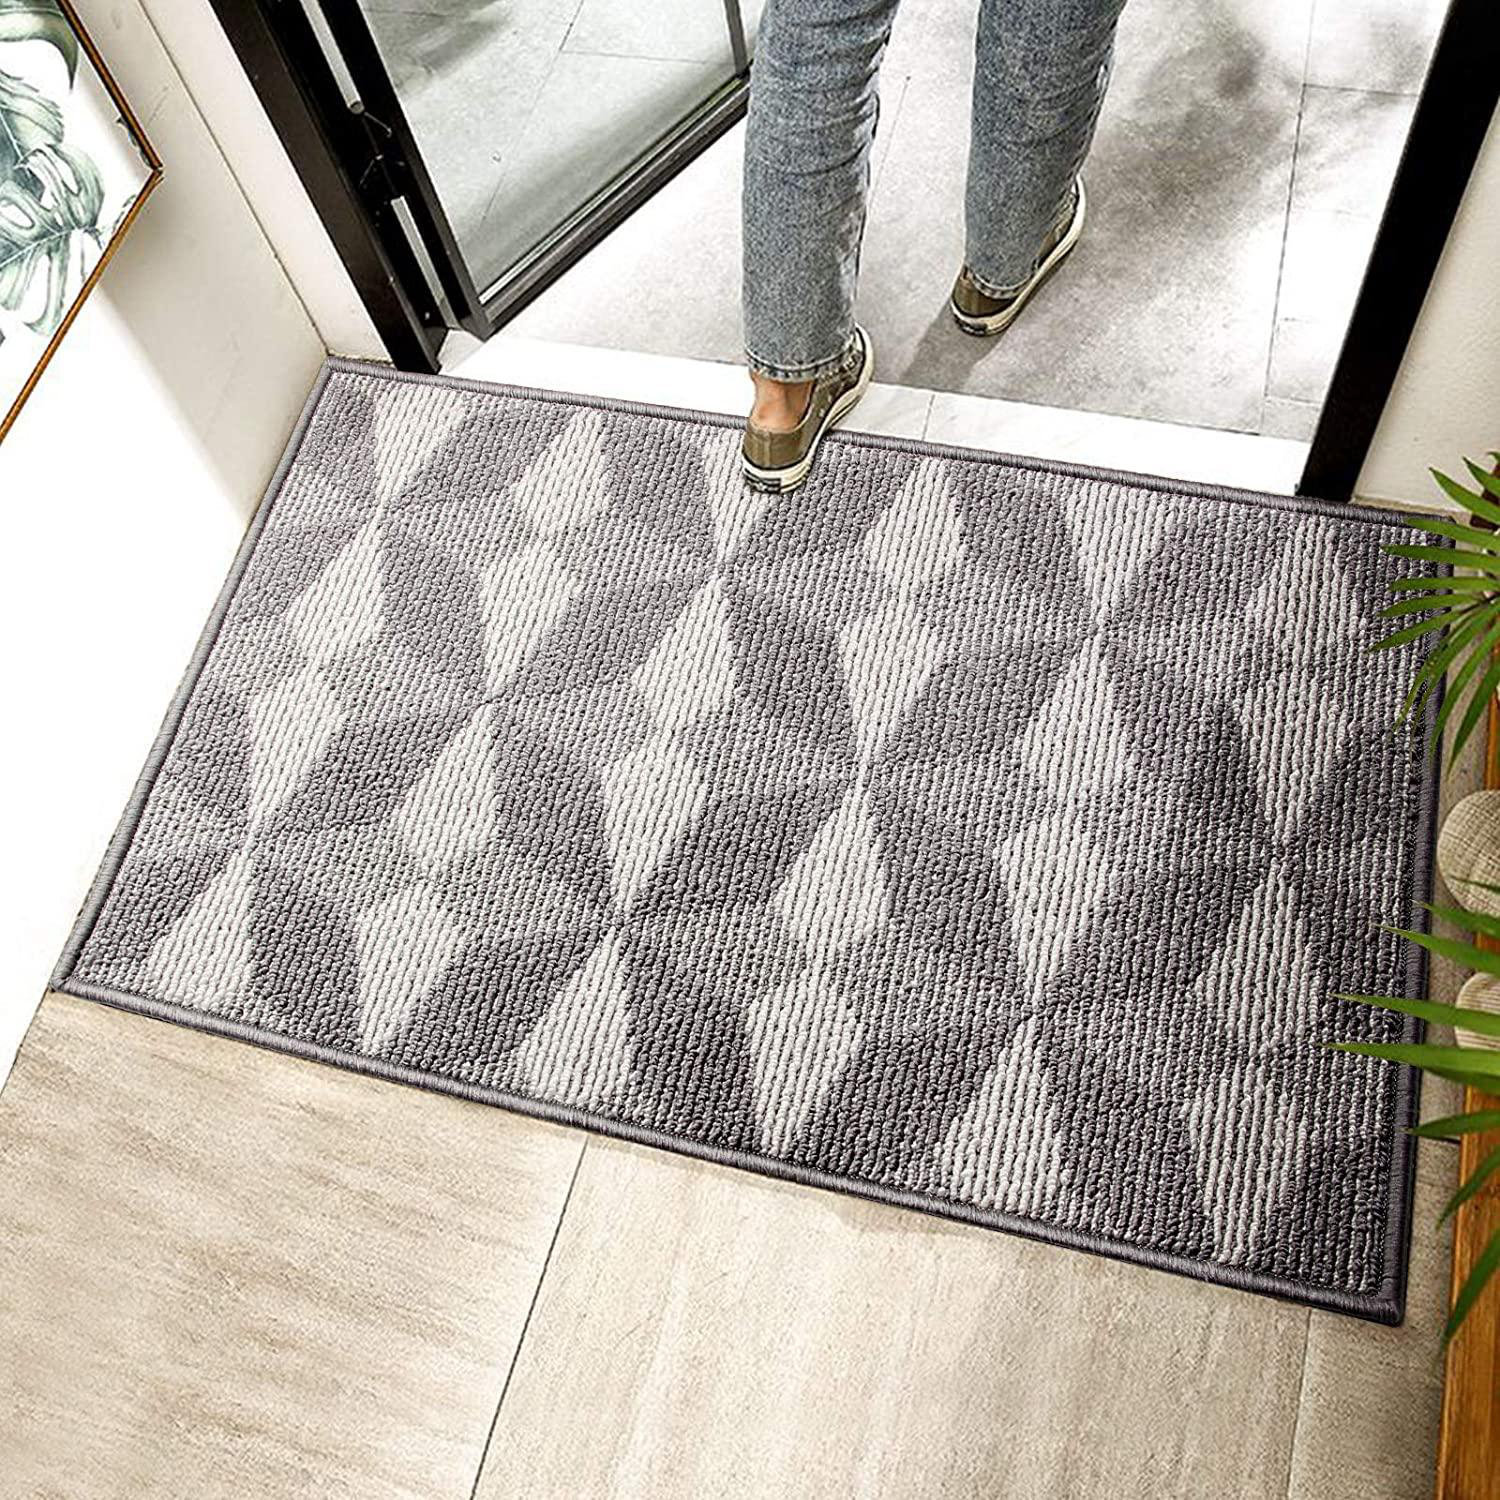 Outdoor Welcome Mats for Front Door Home Entrance Door Mats for Outside Entry Durable Doormats Rubber Rugs for Back Door Entry Garage Patio High Traffic Areas Shoe Rugs 